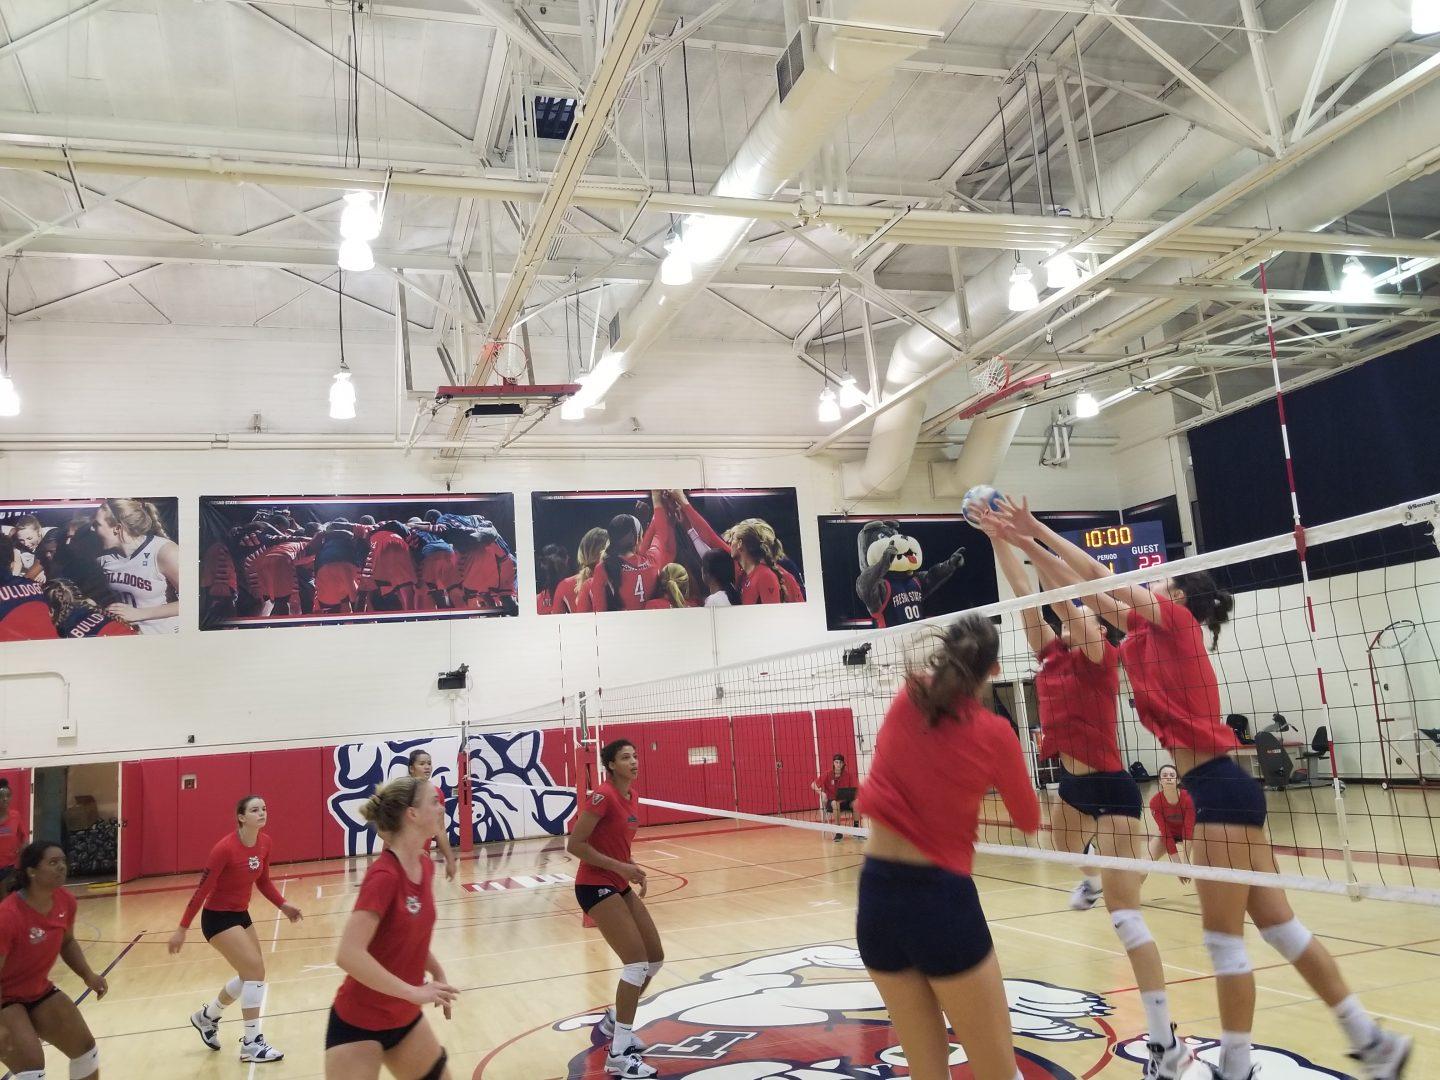 The+Fresno+State+volleyball+practices+their+volleying+and+blocking++in+the+North+Gym+on+Nov.+27%2C+2018+in+preparation+of+the+National+Invitational+Volleyball+Championship+on+Thursday.++%28Michael+Ford%2FThe+Collegian%29